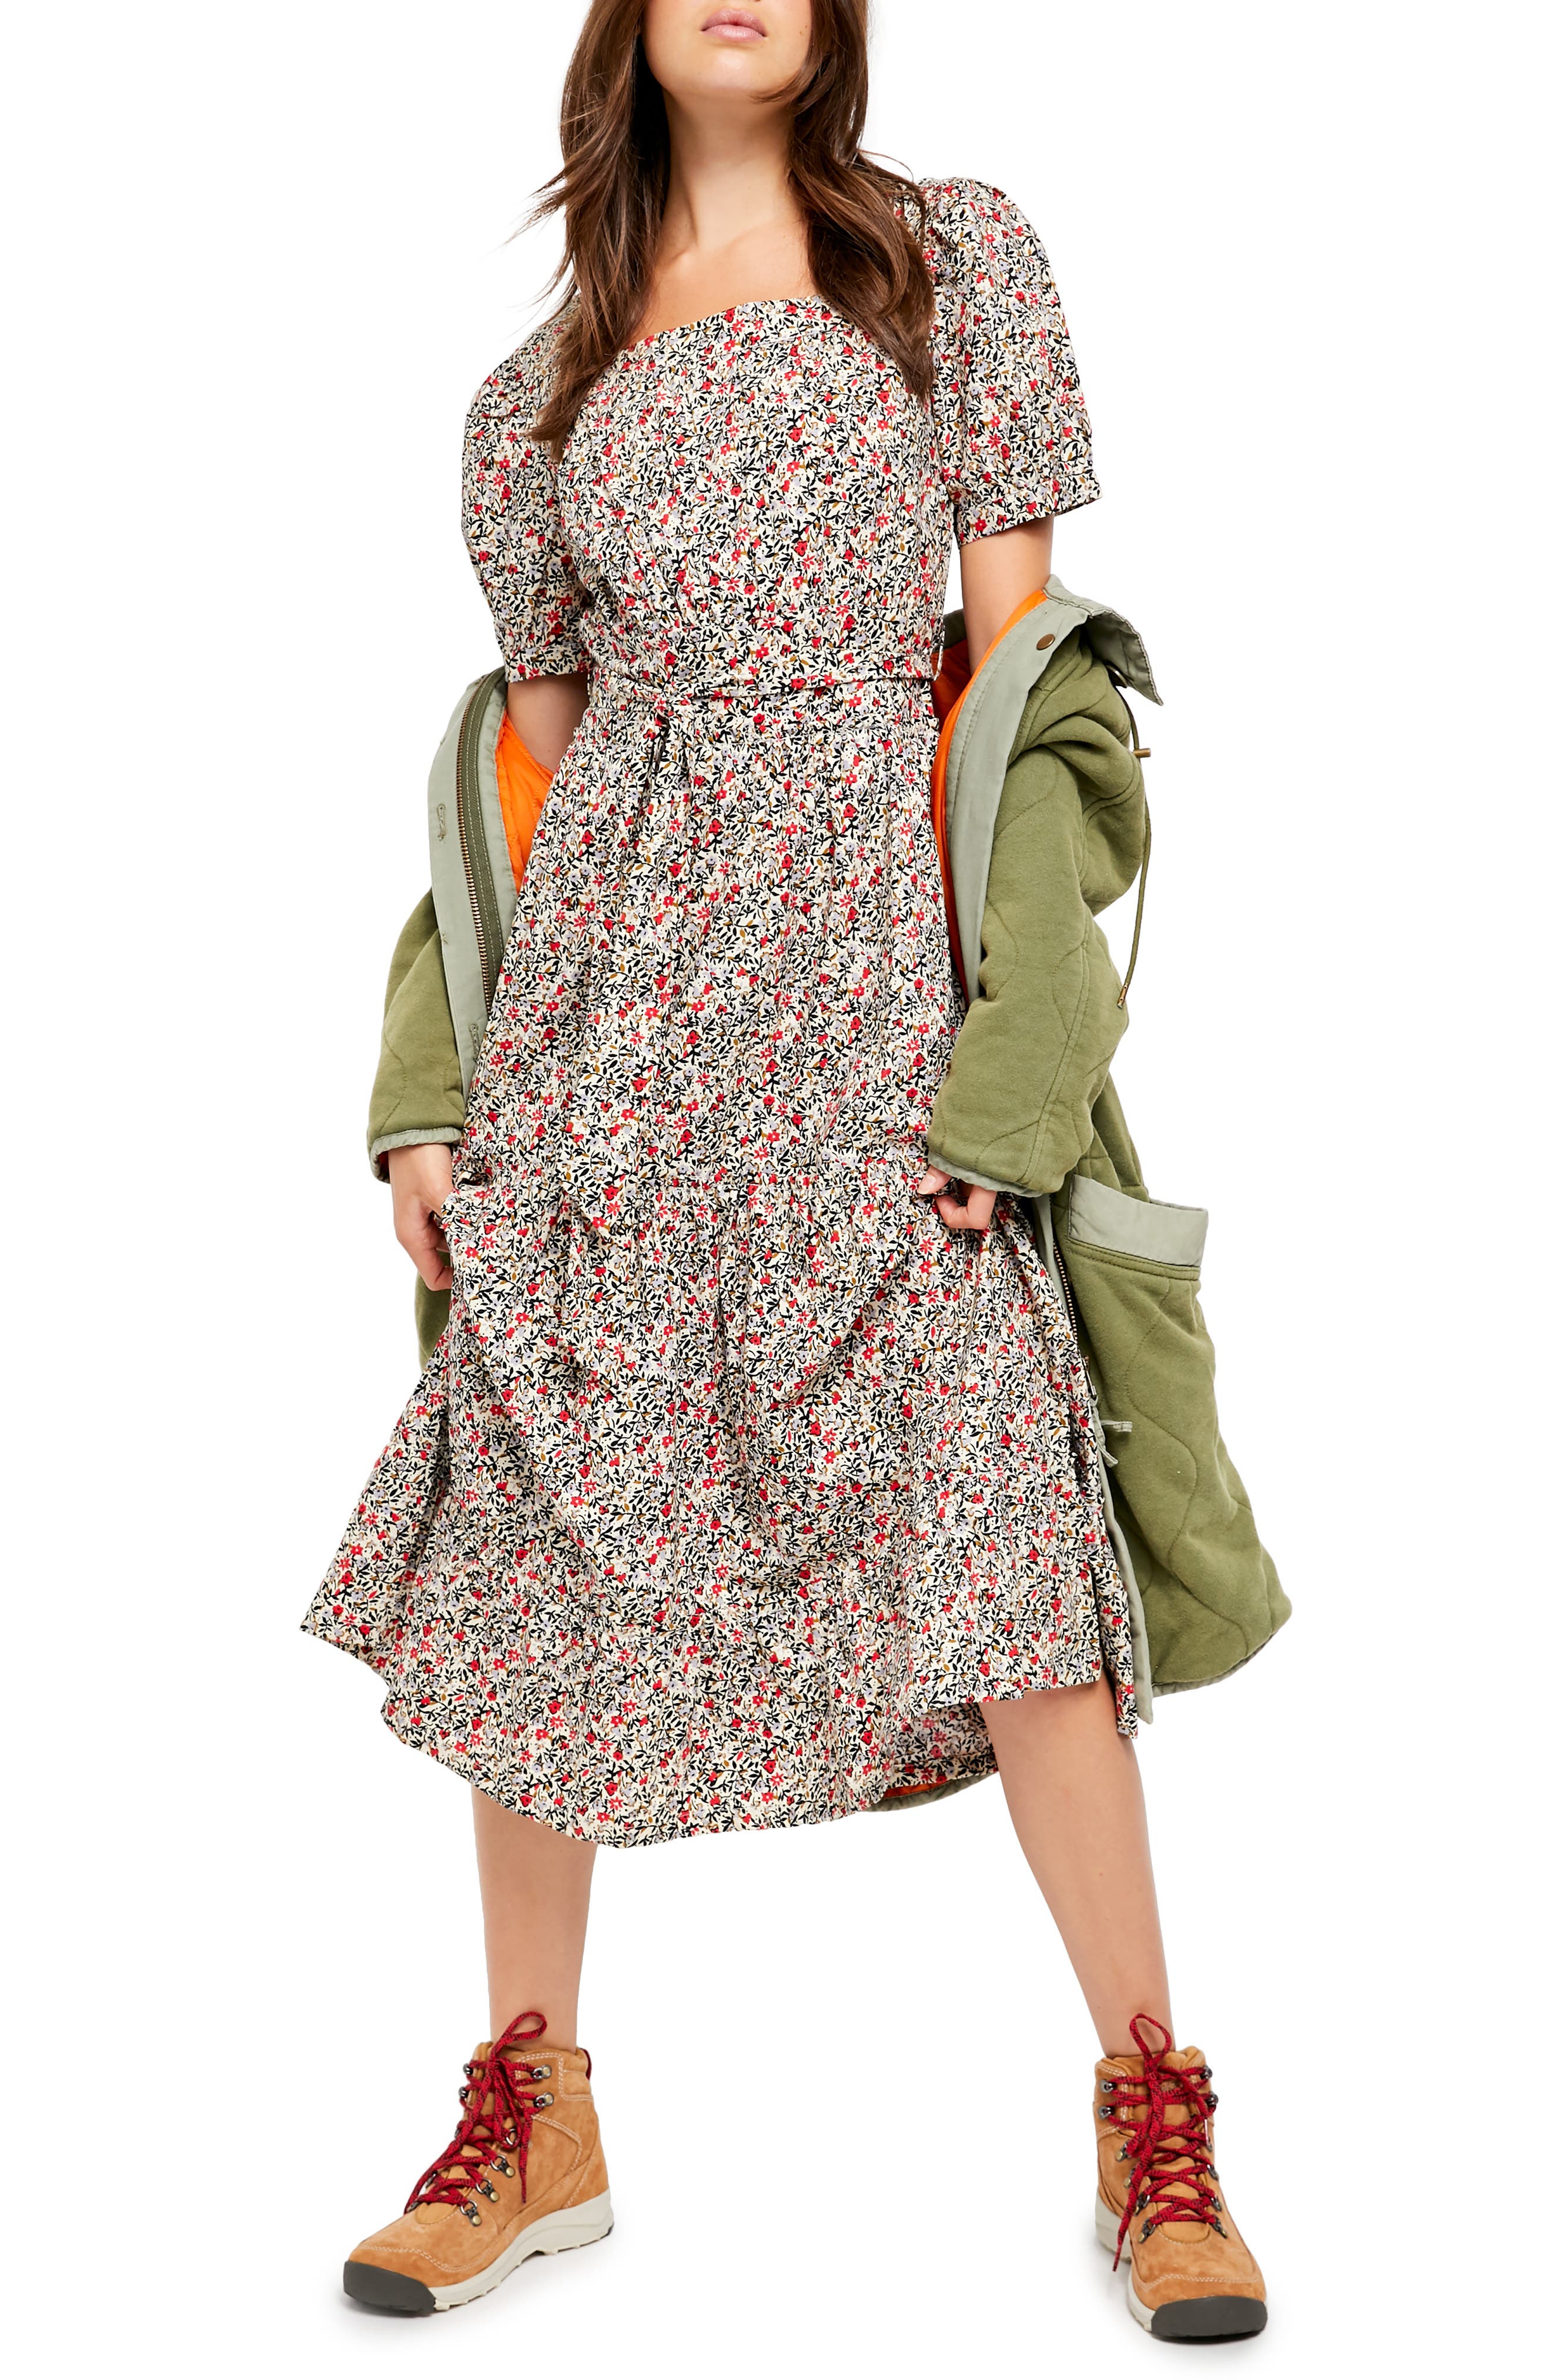 Get In on the Prairie Dress Trend This Winter If You Hate Wearing Tights